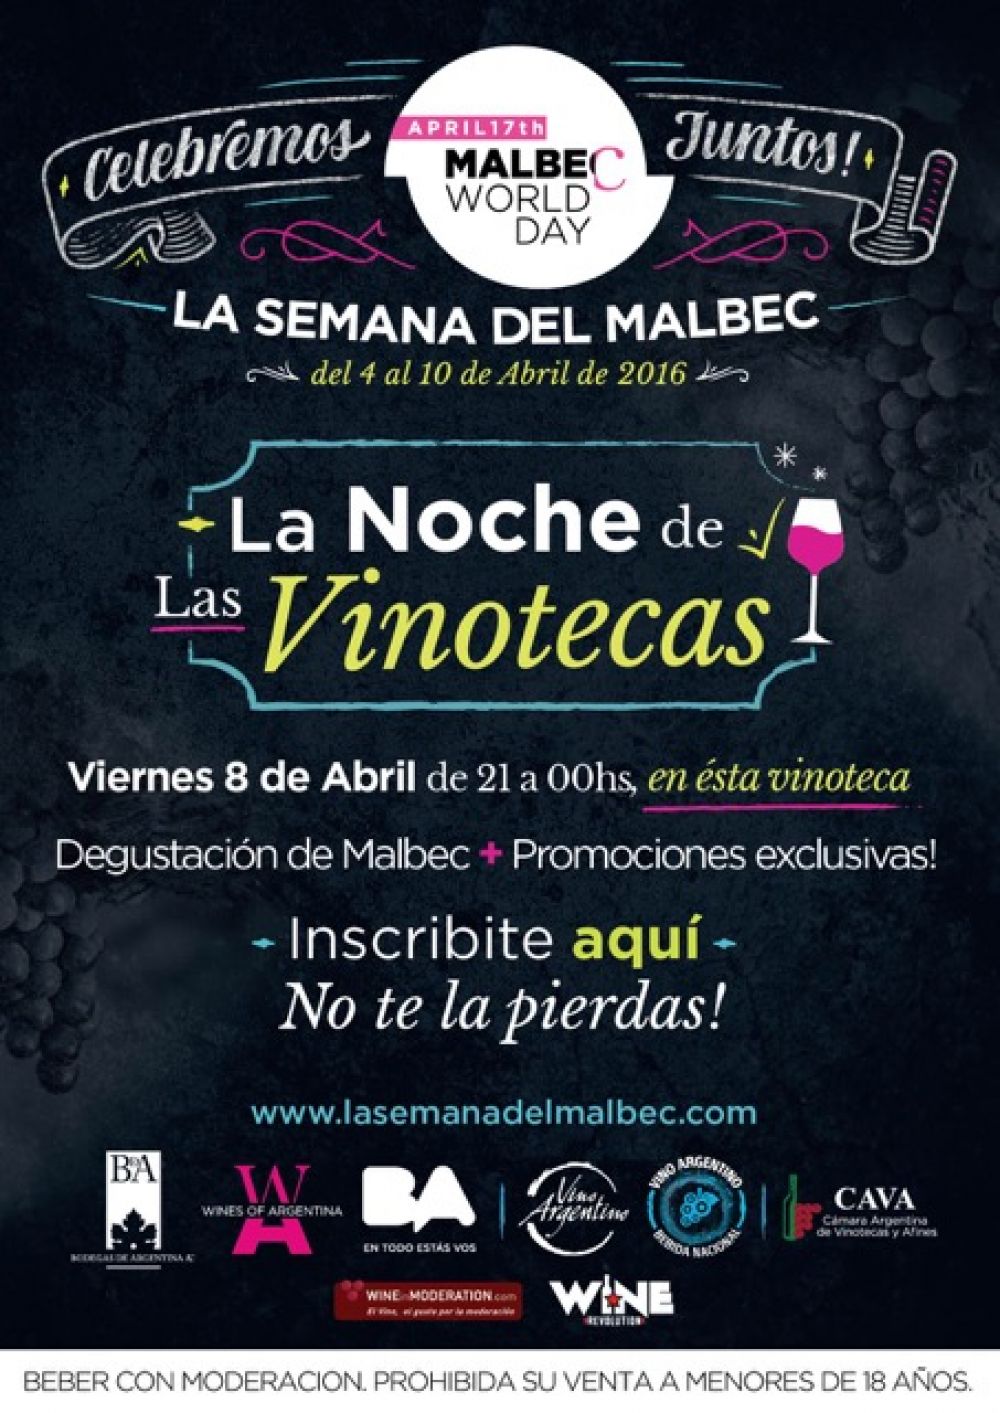 A week dedicated to Malbec